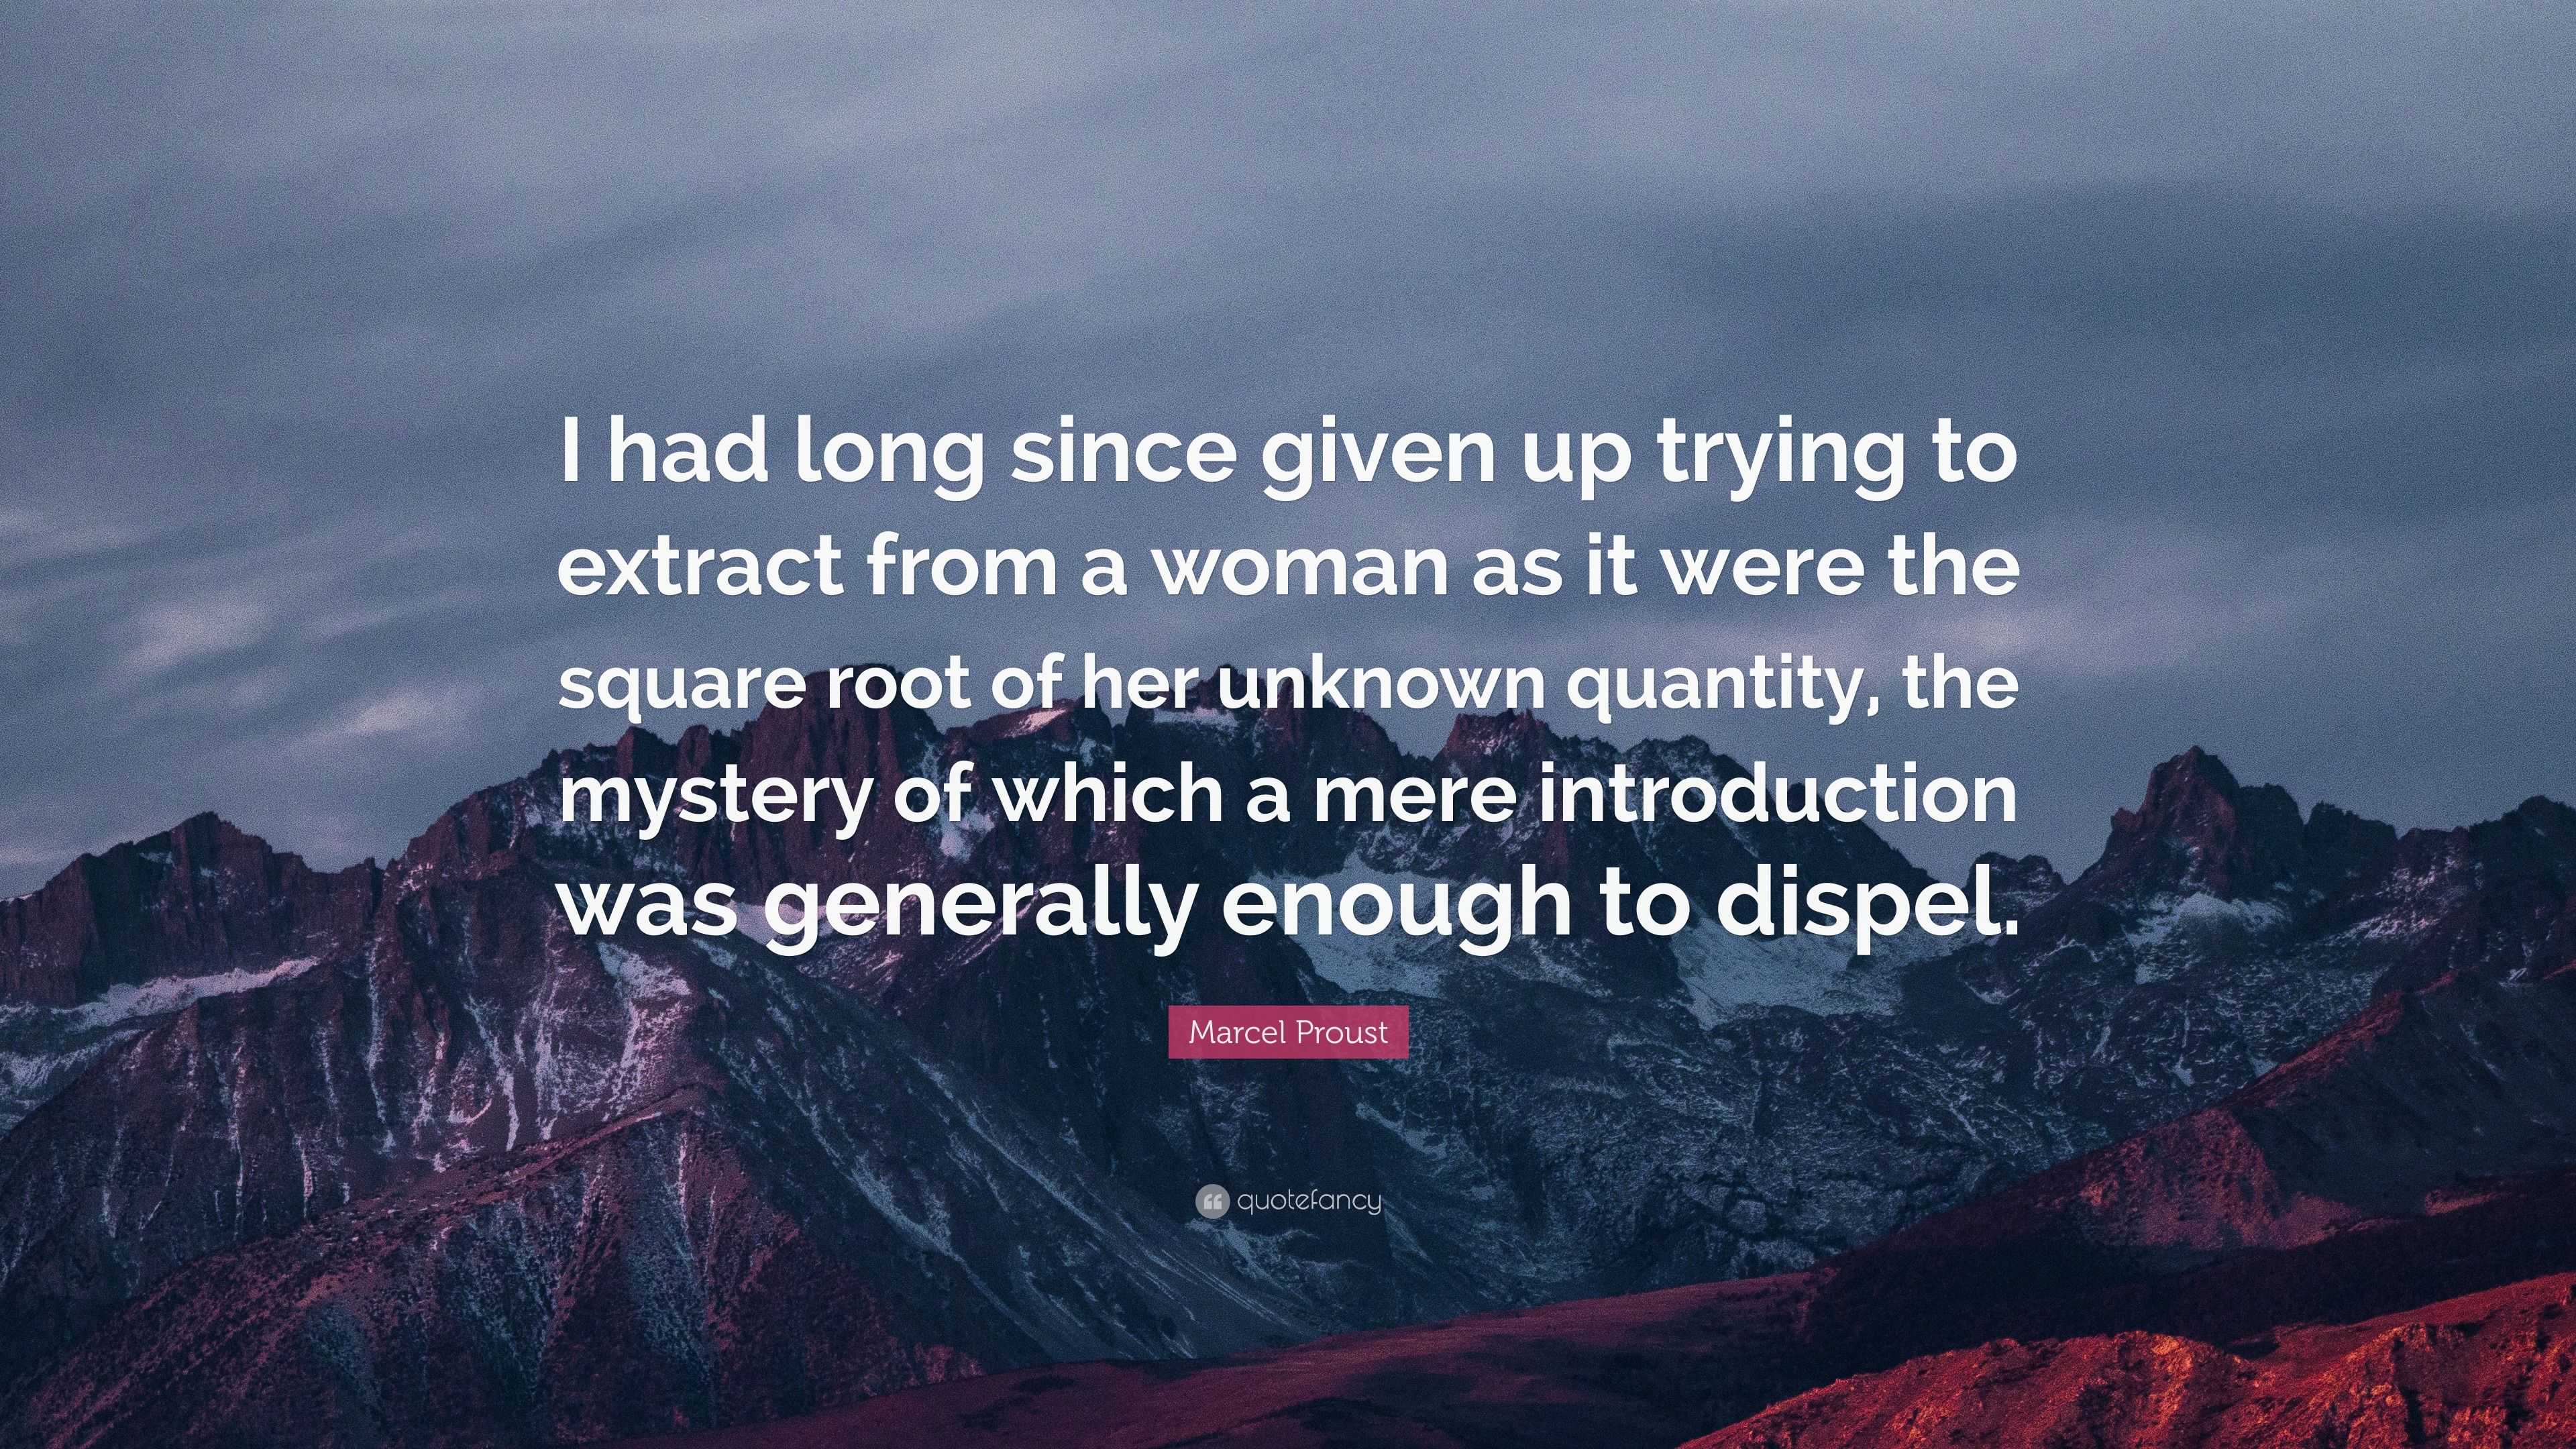 Marcel Proust Quote: “I had long since given up trying to extract from ...